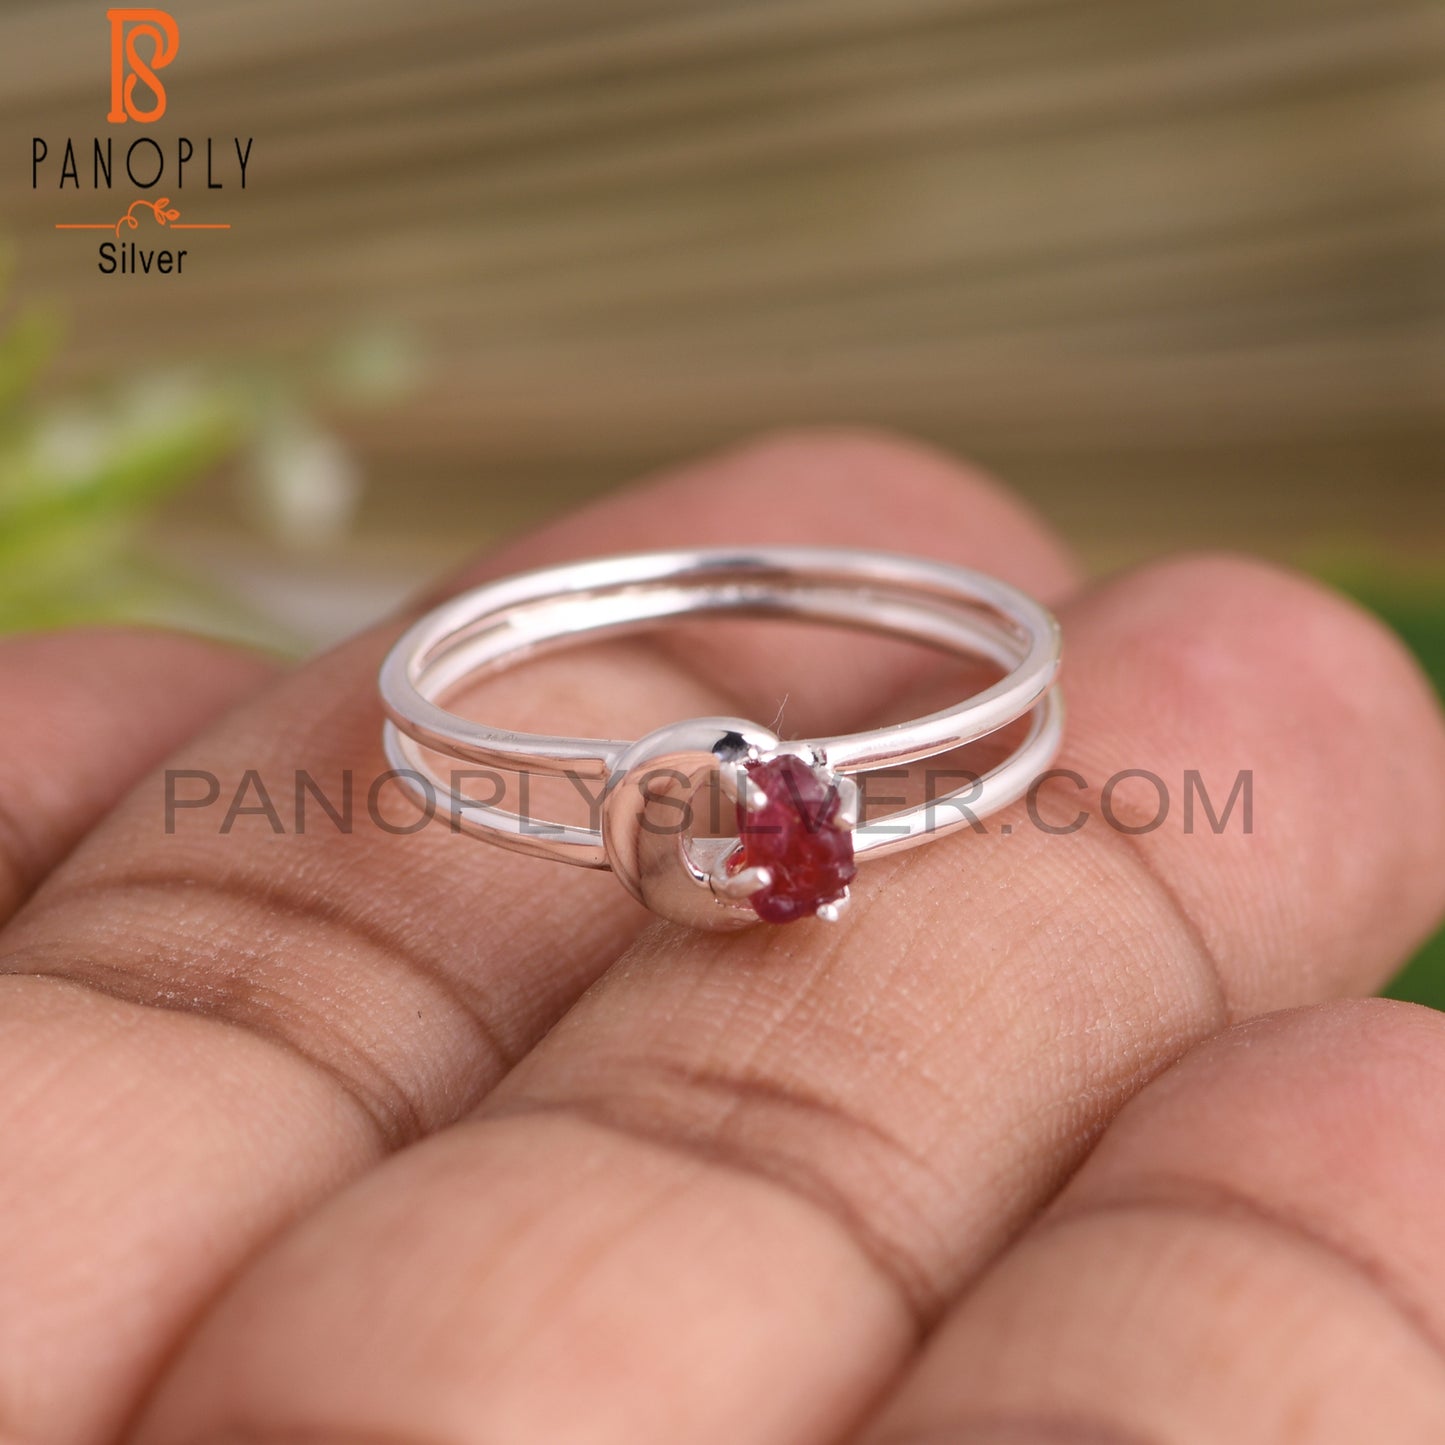 Spinel Ruby Rough Sterling Silver Ring